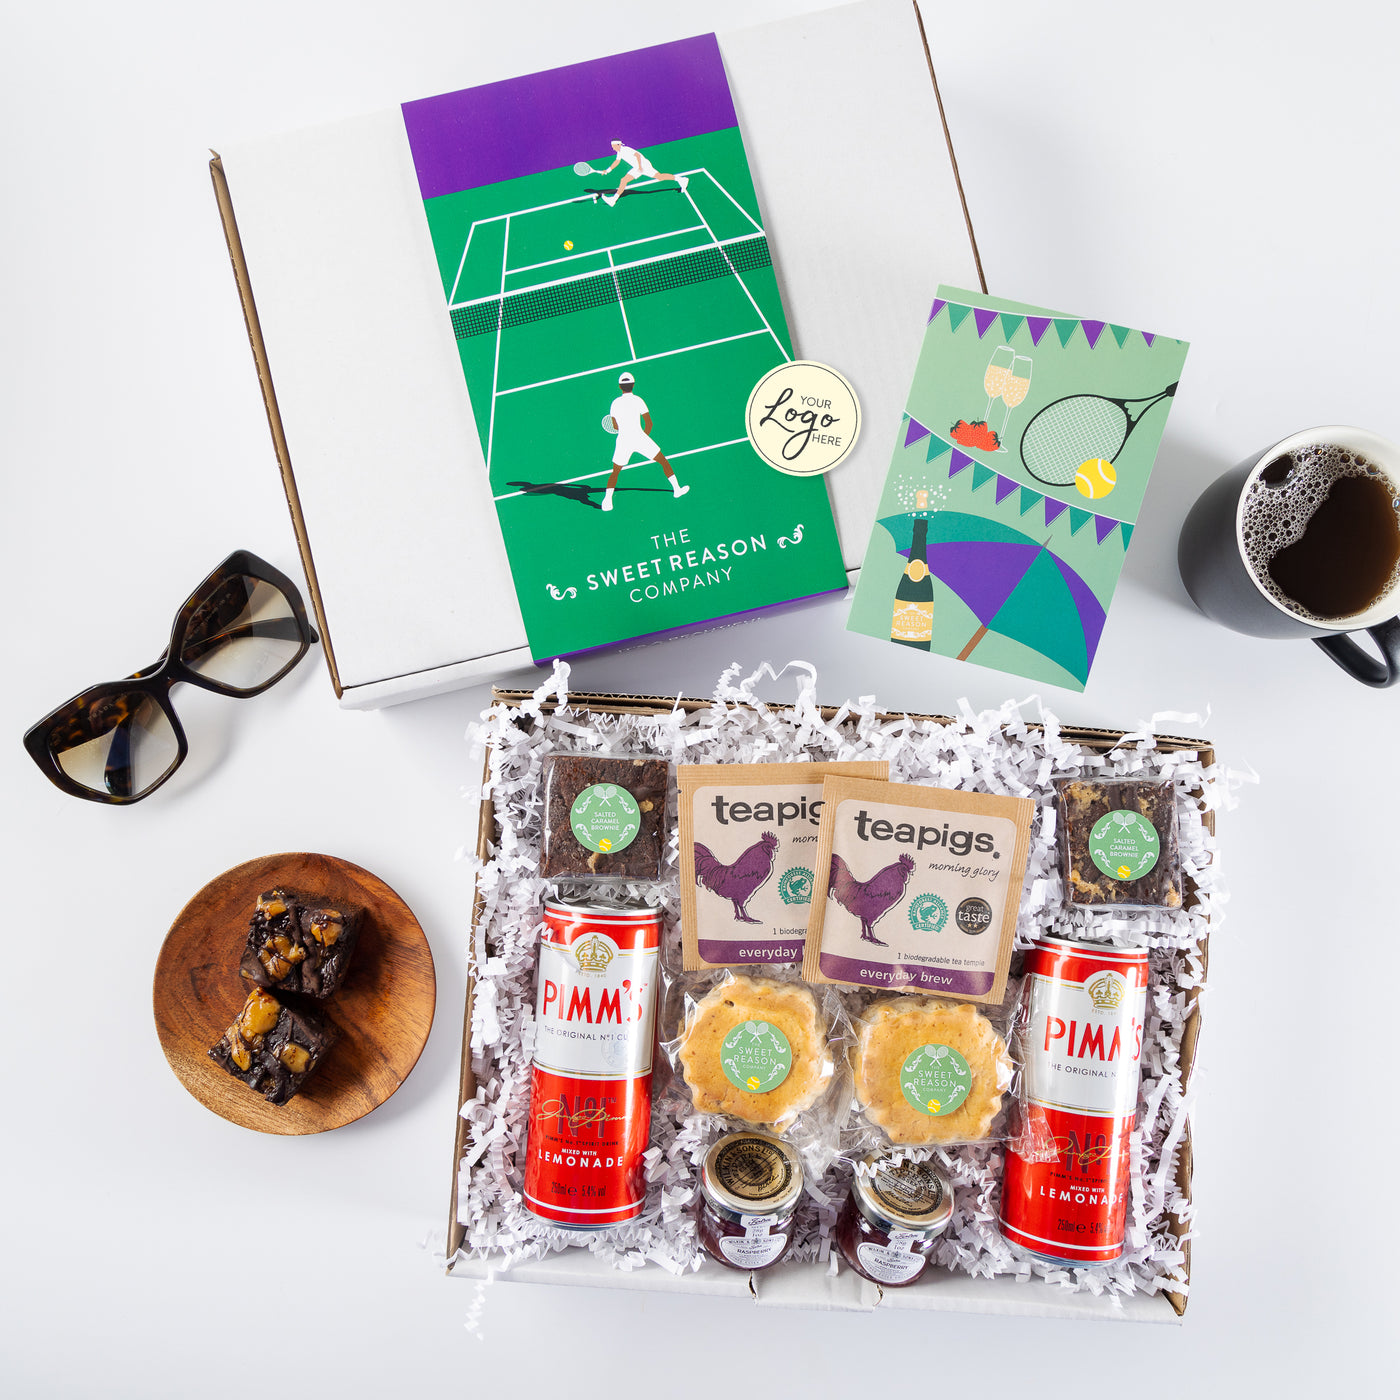 Branded & personalised 'Wimbledon' Treats, Scones, Jam and Pimm's